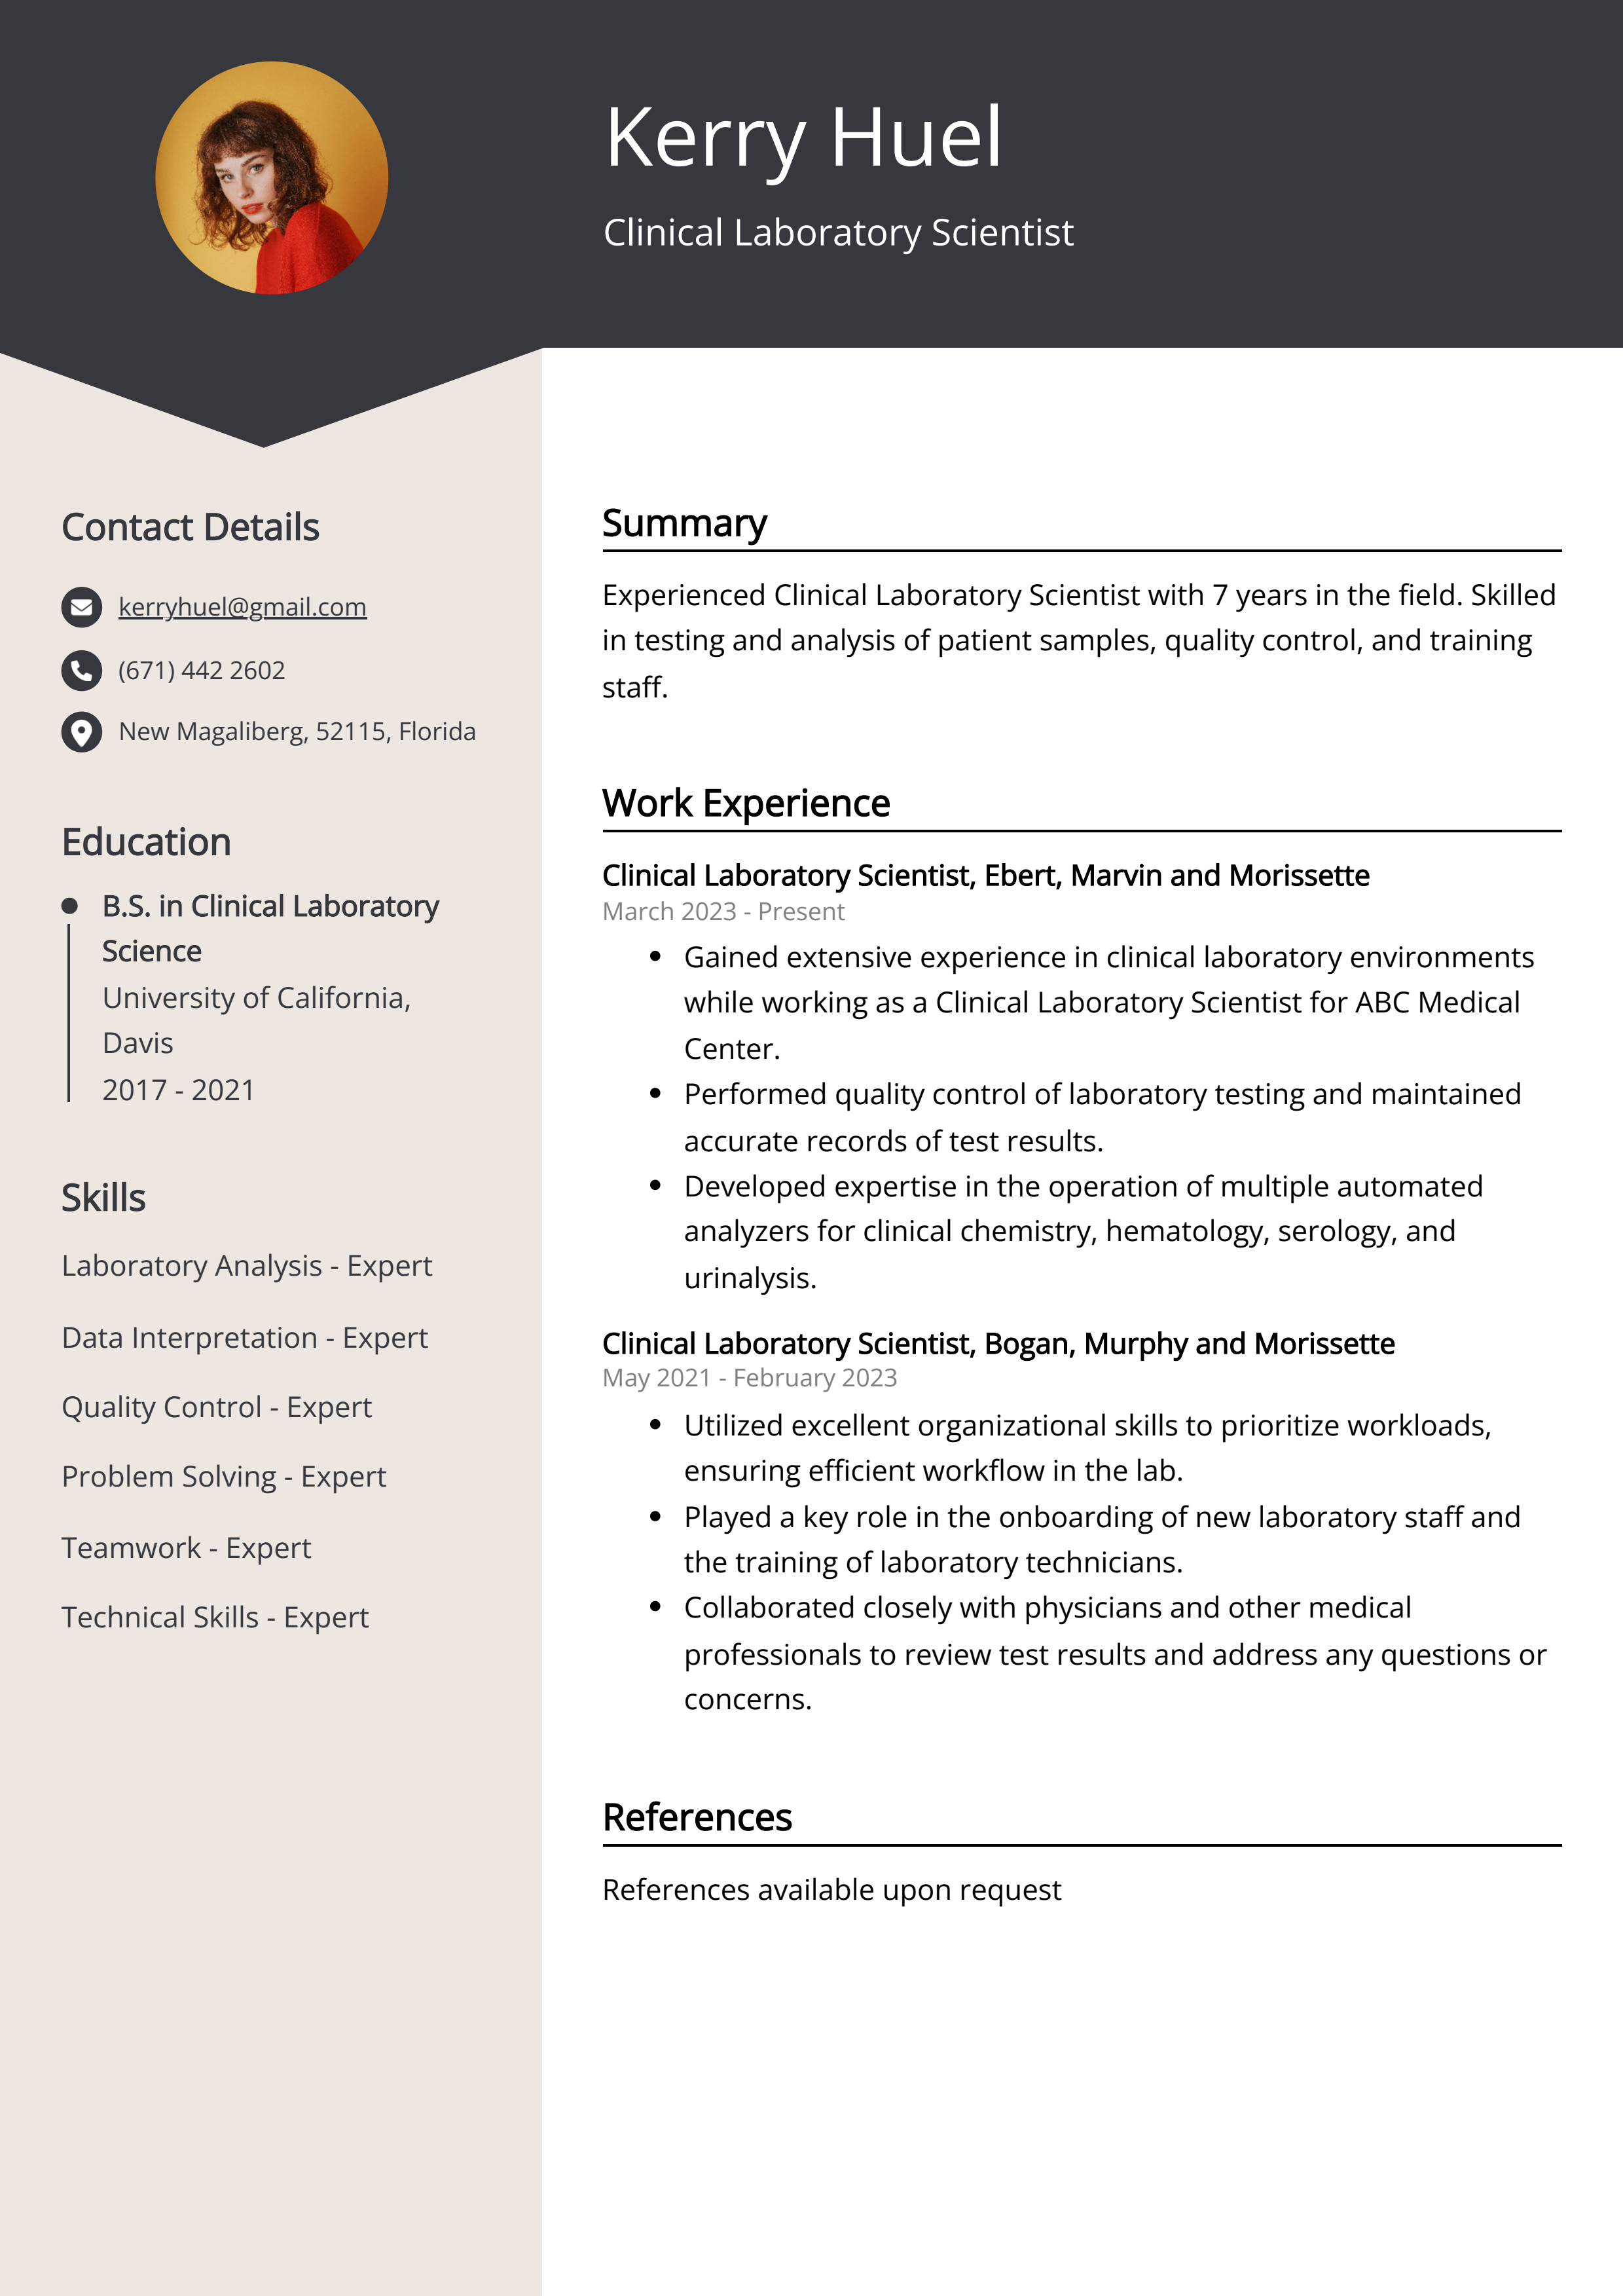 Clinical Laboratory Scientist CV Example